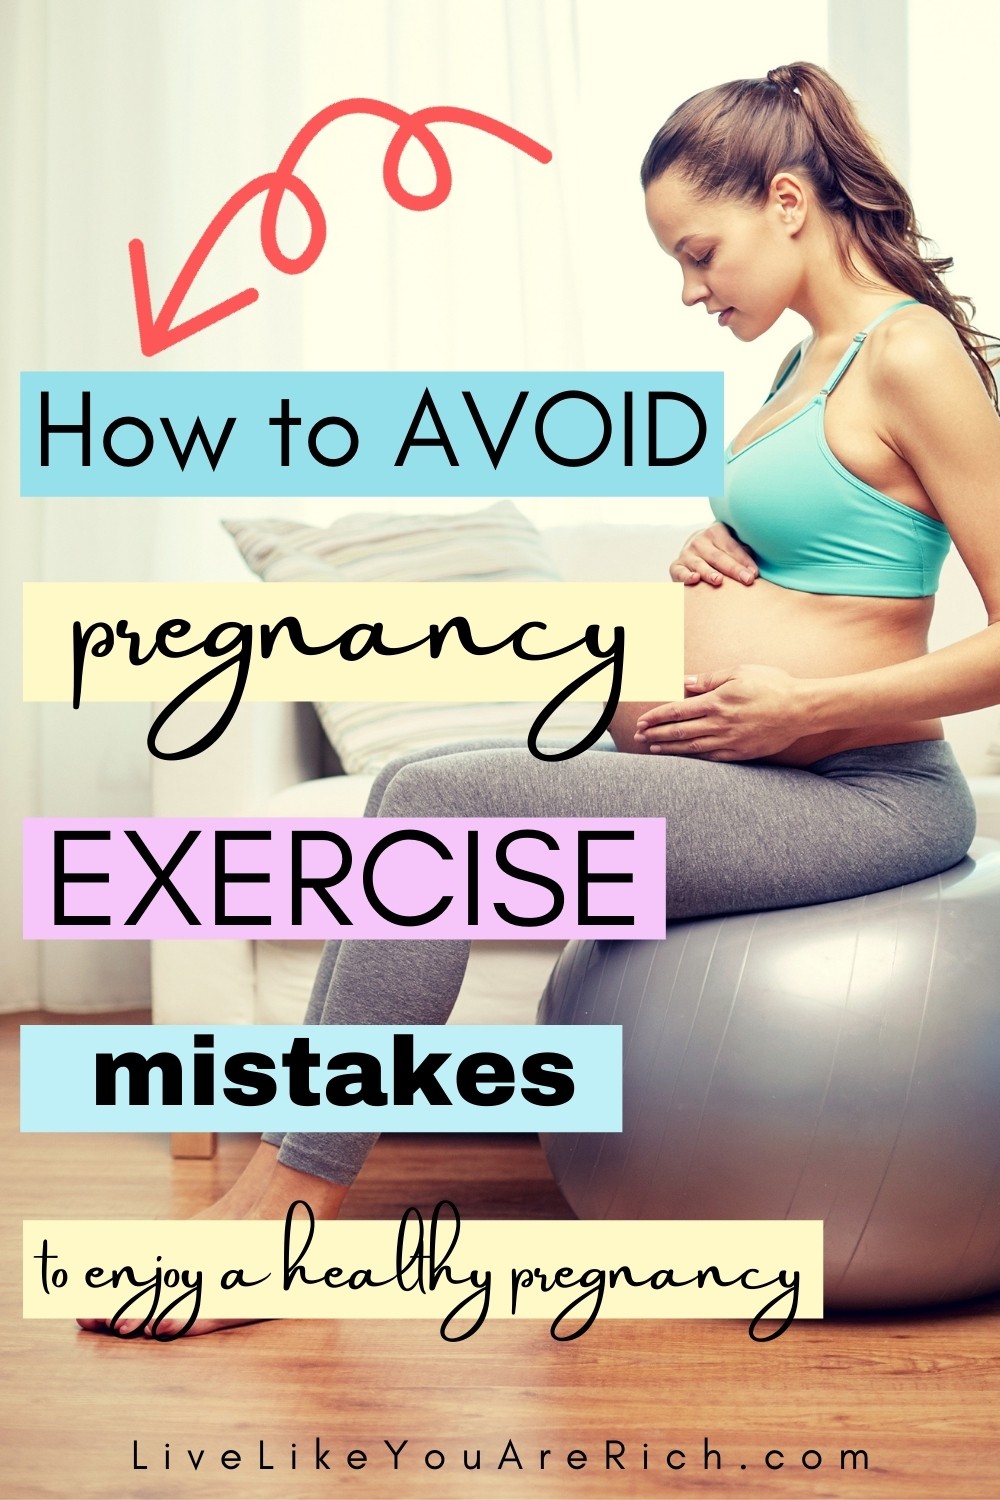 It’s amazing how being pregnant changes almost every aspect of your life—almost immediately. While you incorporate exercise as a part of your daily routine to enjoy a healthy pregnancy, if careless, you could be causing yourself (and your baby) more harm than good. Here are the top five pregnancy exercise mistakes and ways to avoid them. #pregnancy #pregnancytips #healthandfitness